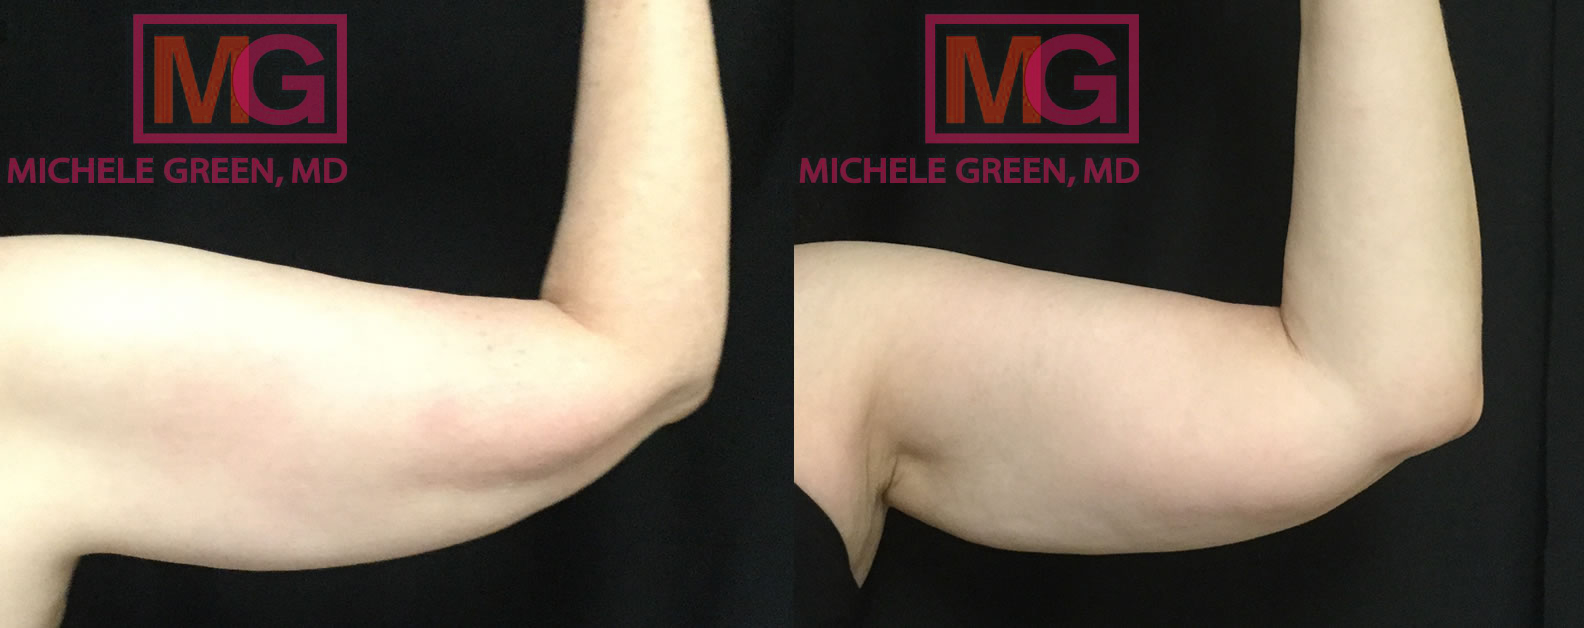 58yo female coolsculpting before after arms1 MGwatermark